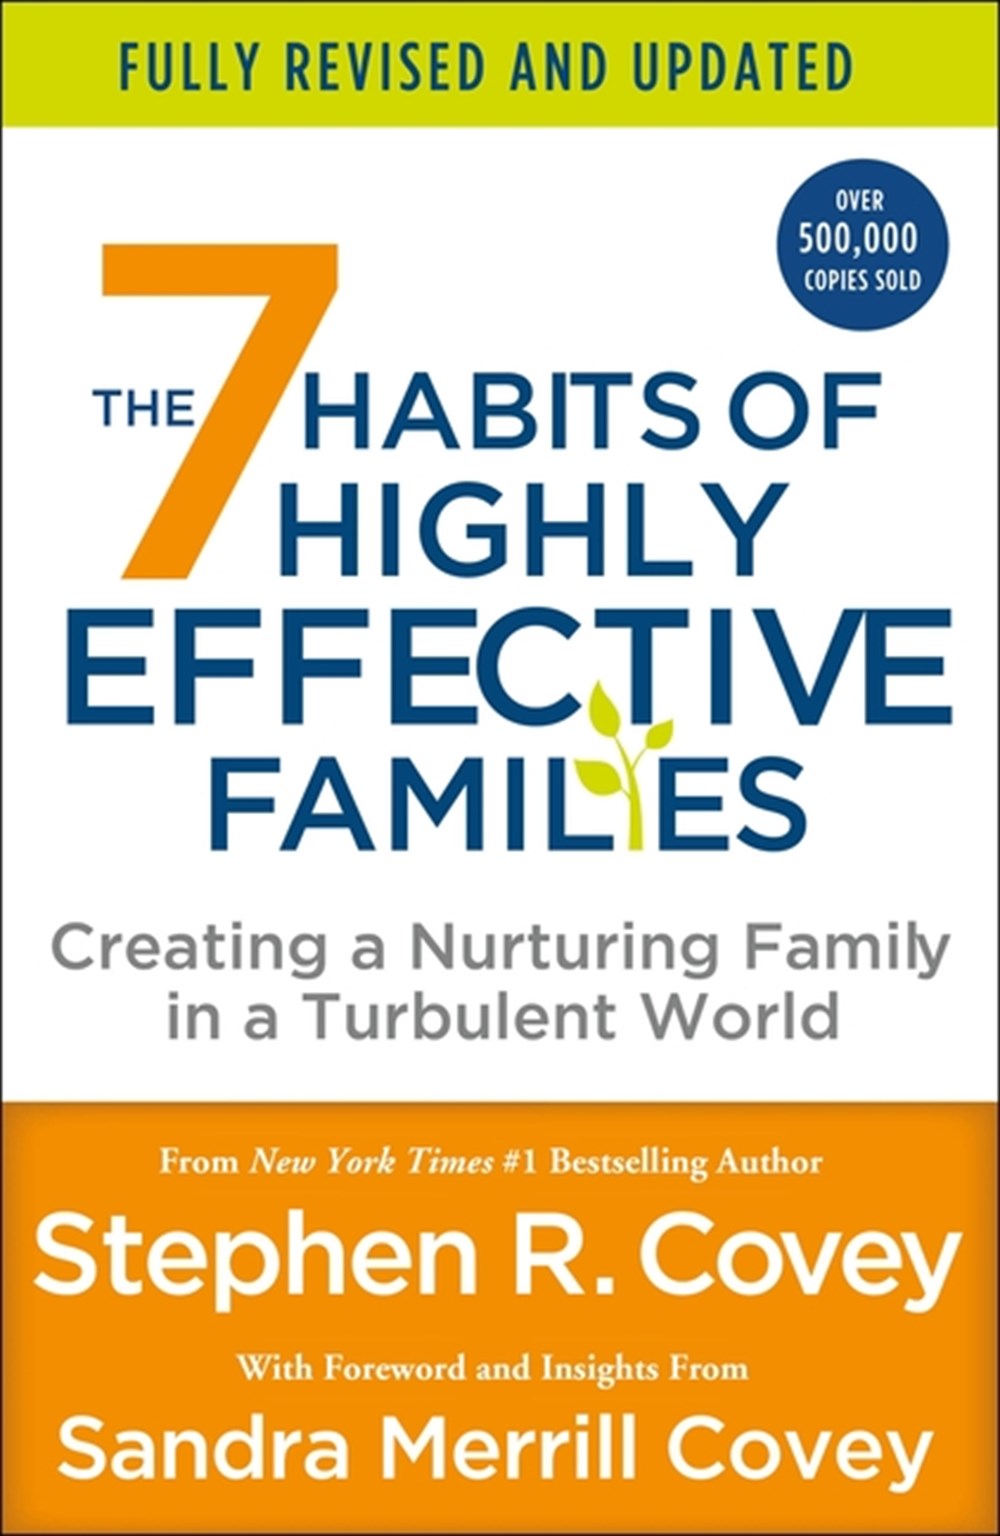 7 Habits of Highly Effective Families (Fully Revised and Updated) Creating a Nurturing Family in a T